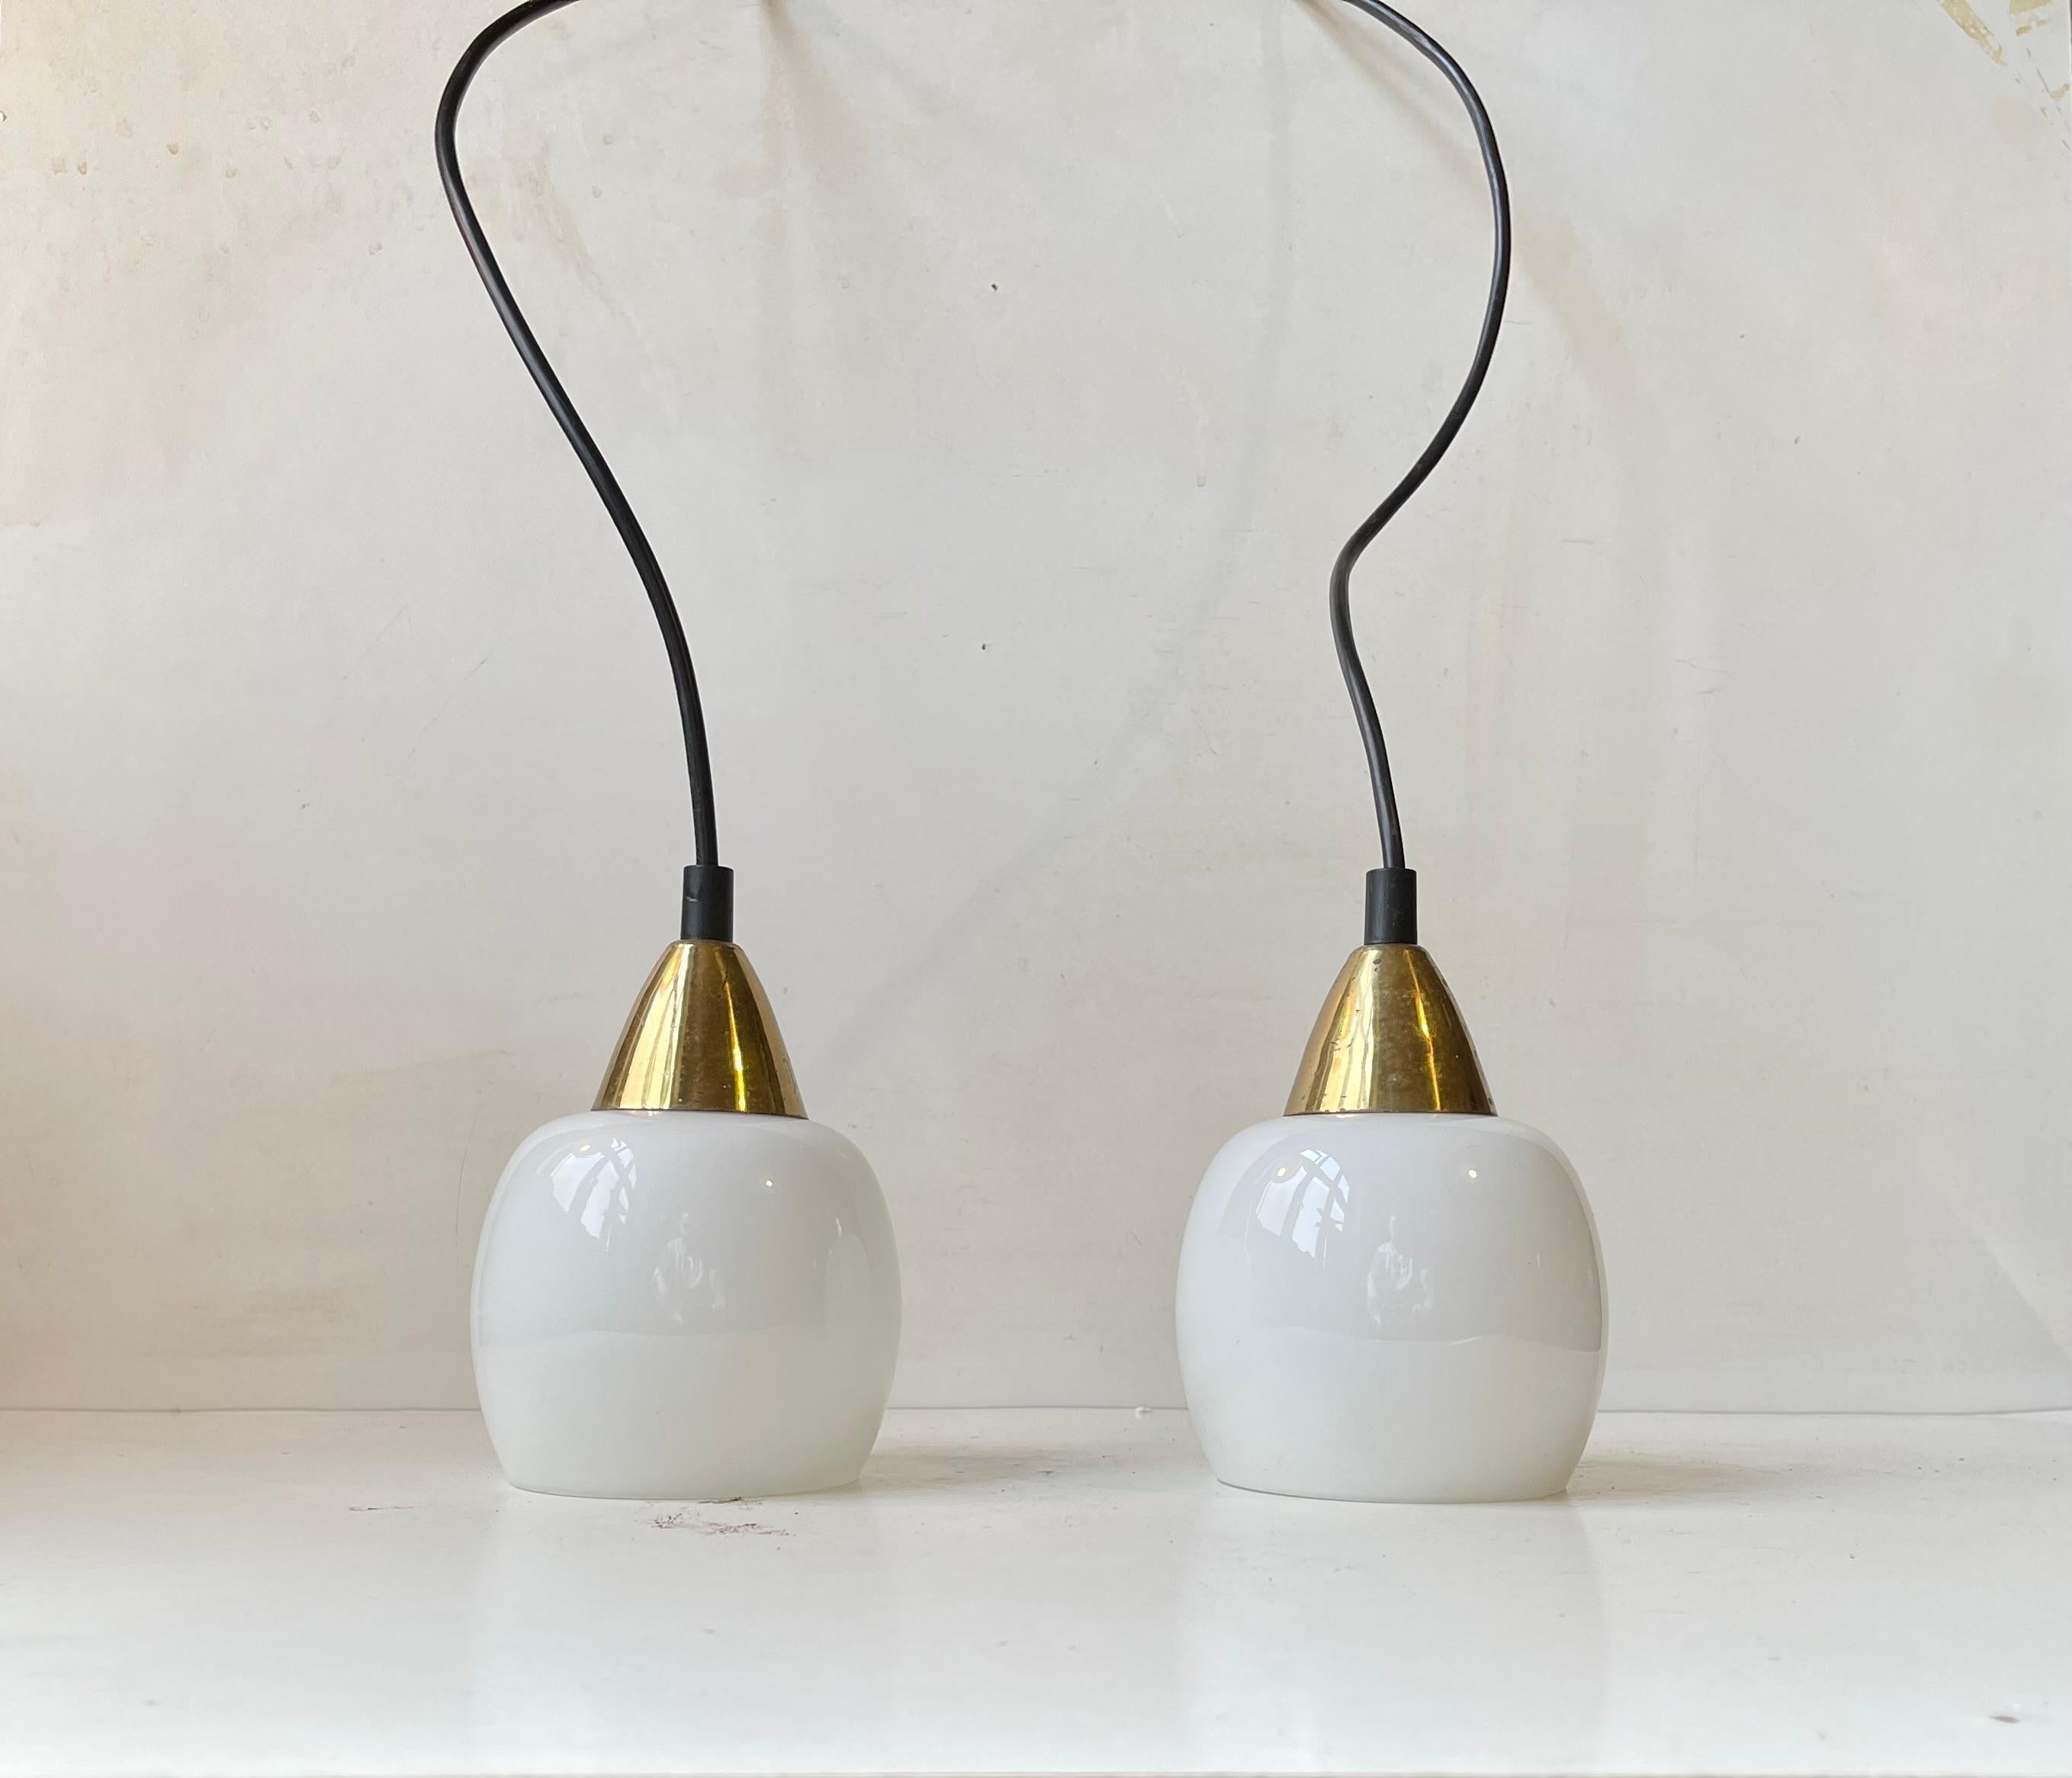 A set of window pendant lights composed of white opaline glass and brass. Manufactured in Denmark circa 1970 in a style reminiscent of Vilhelm Lauritzen. Measurements: H: 16 cm, Diameter: 10 cm.